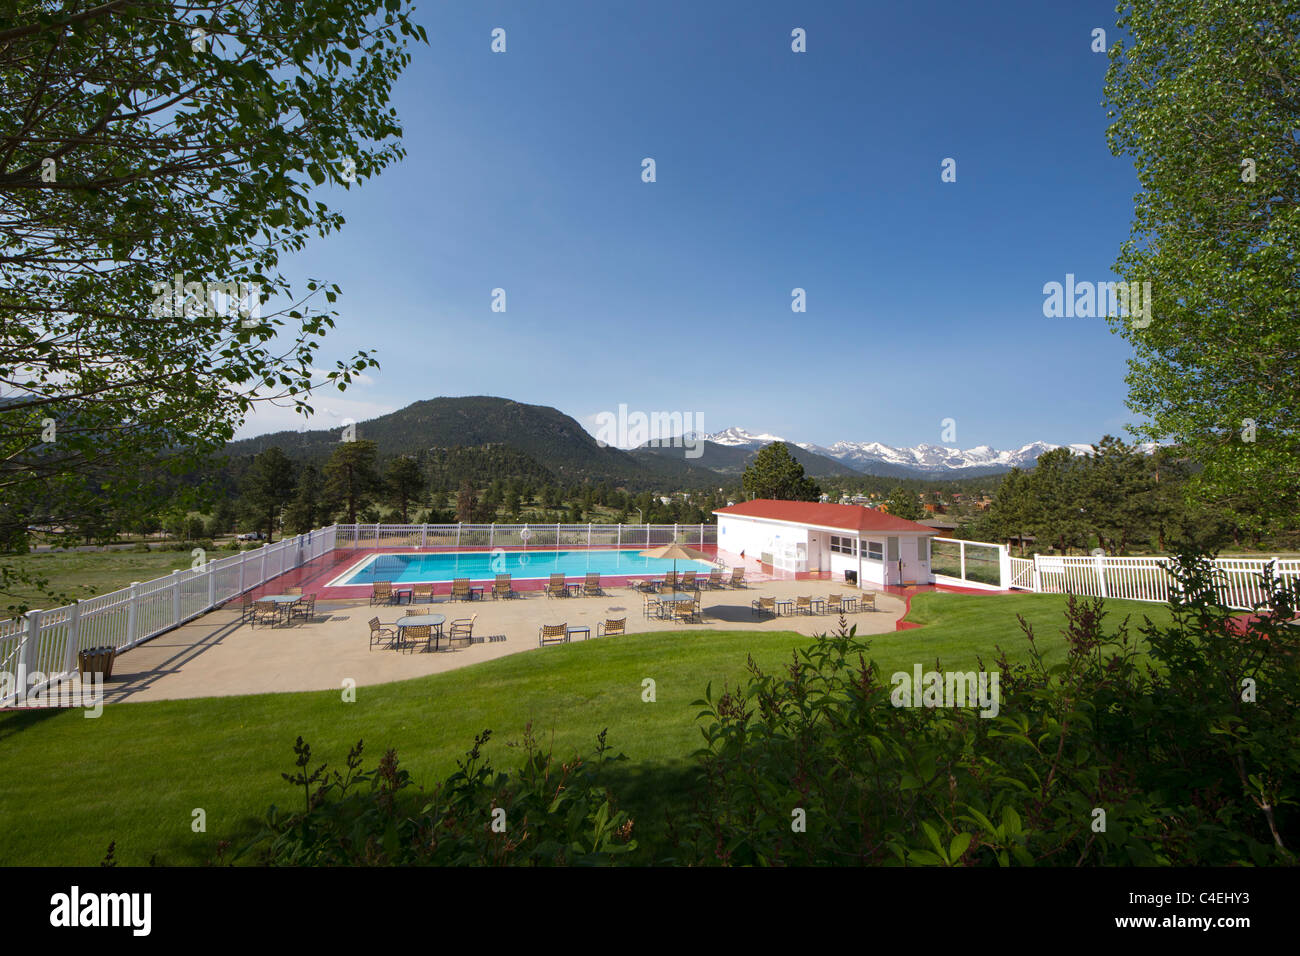 The swimming pool at the Stanley Hotel in Estes Park, Colorado